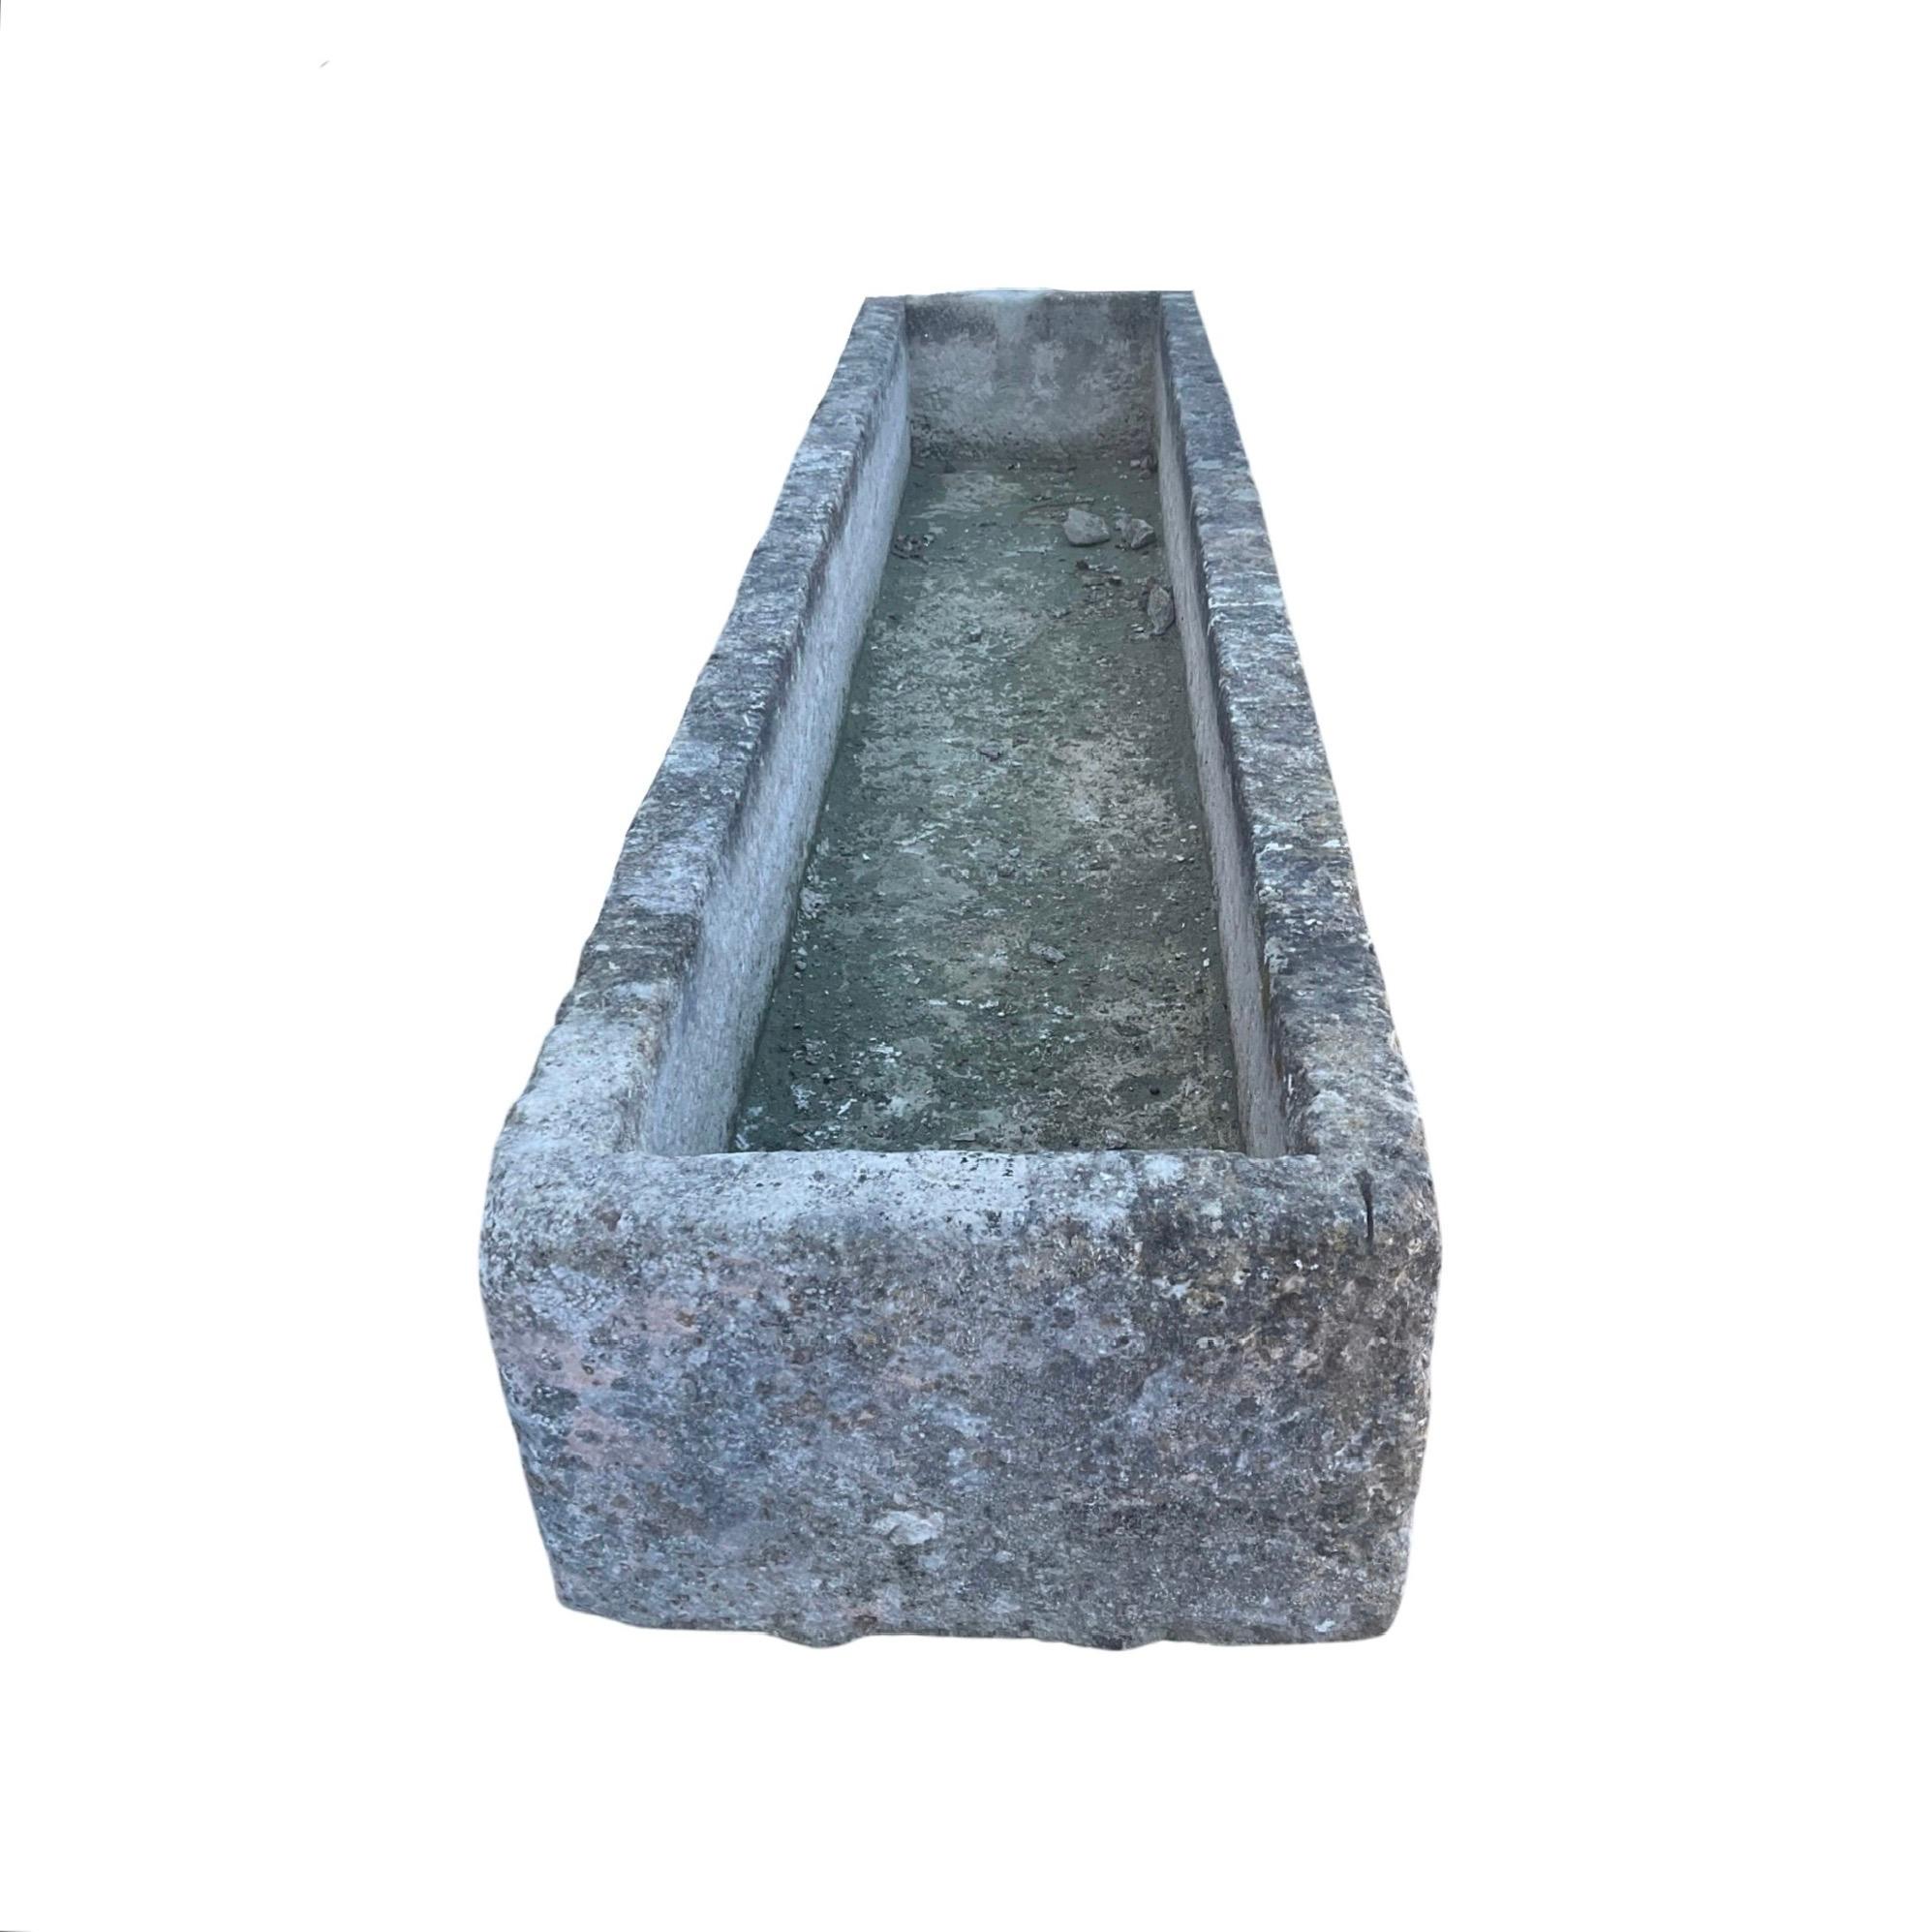 This 17th century antique French limestone trough boasts a large size and timeless style. Crafted from durable limestone, it is the perfect addition to any outdoor space. Its trough design allows for easy gardening and adds a classic touch to your